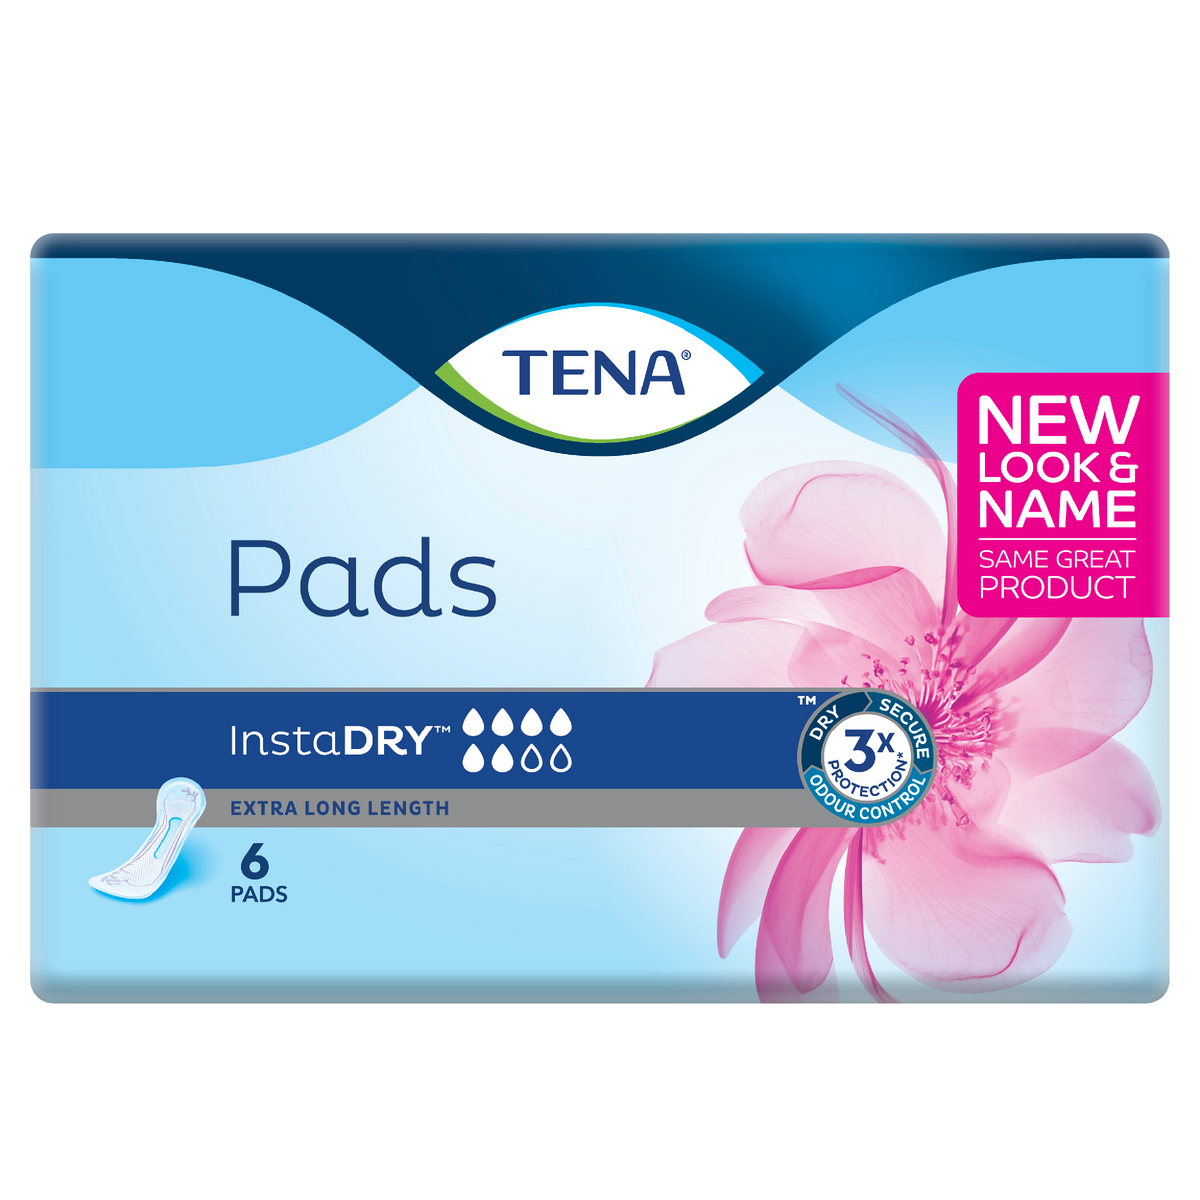 Why Extra-Large Pads are Ideal?